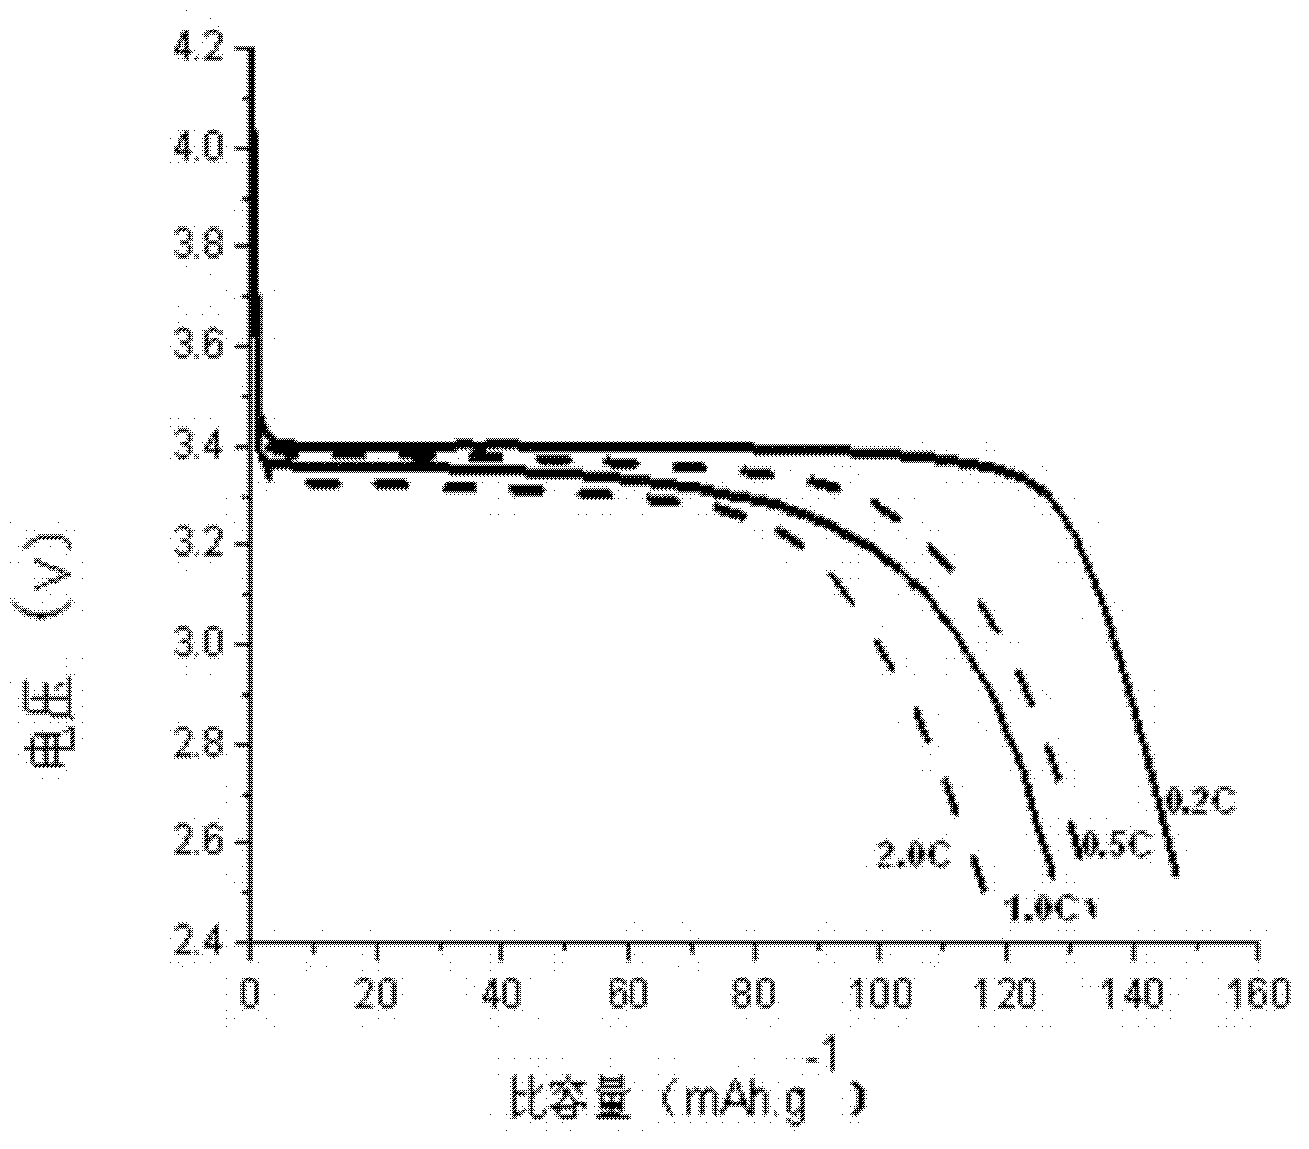 Lithium iron phosphate/PpyPy composite cathode material for boron-doped modification lithium ion battery and preparation method therefor